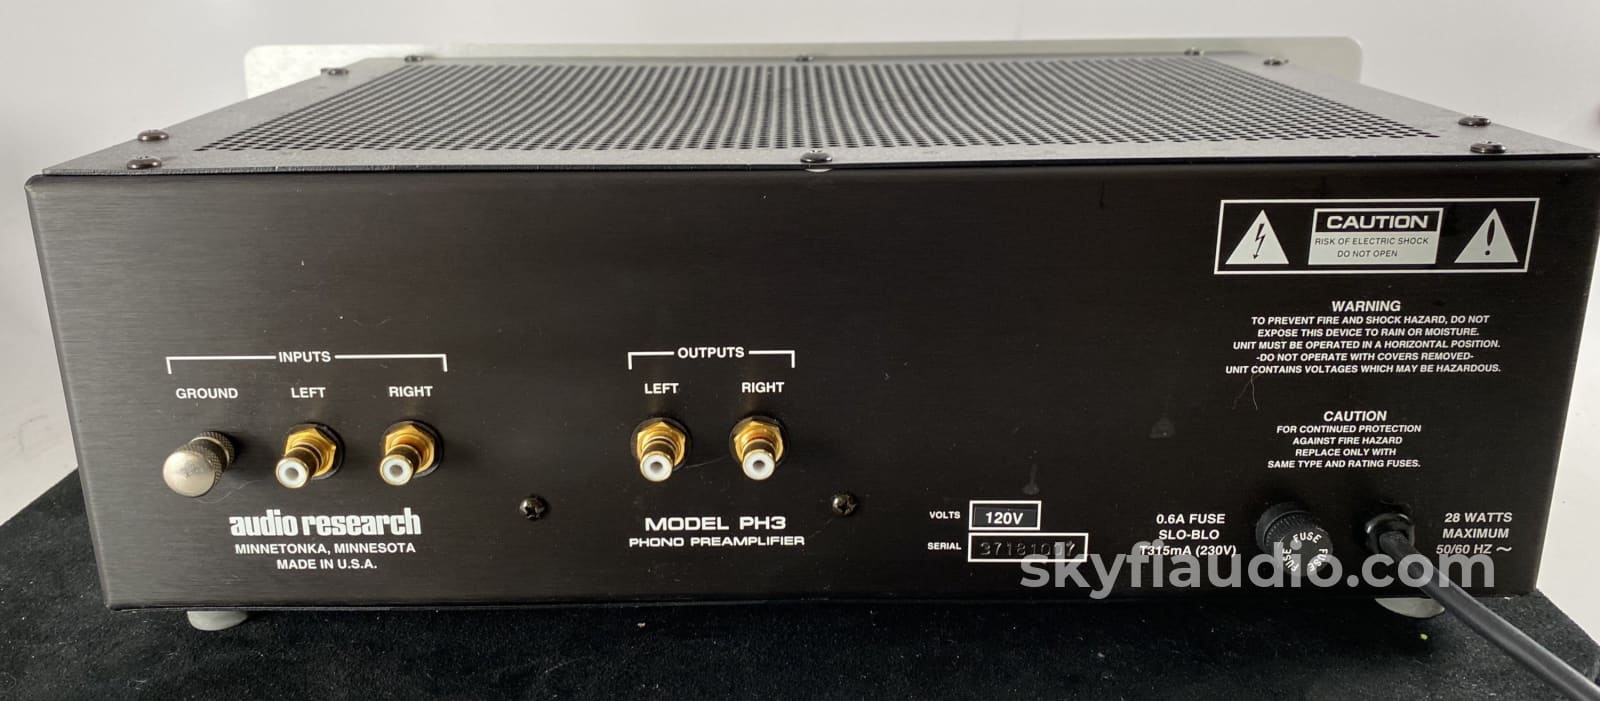 Audio Research Ph3 Hybrid Tube Phono Preamplifier